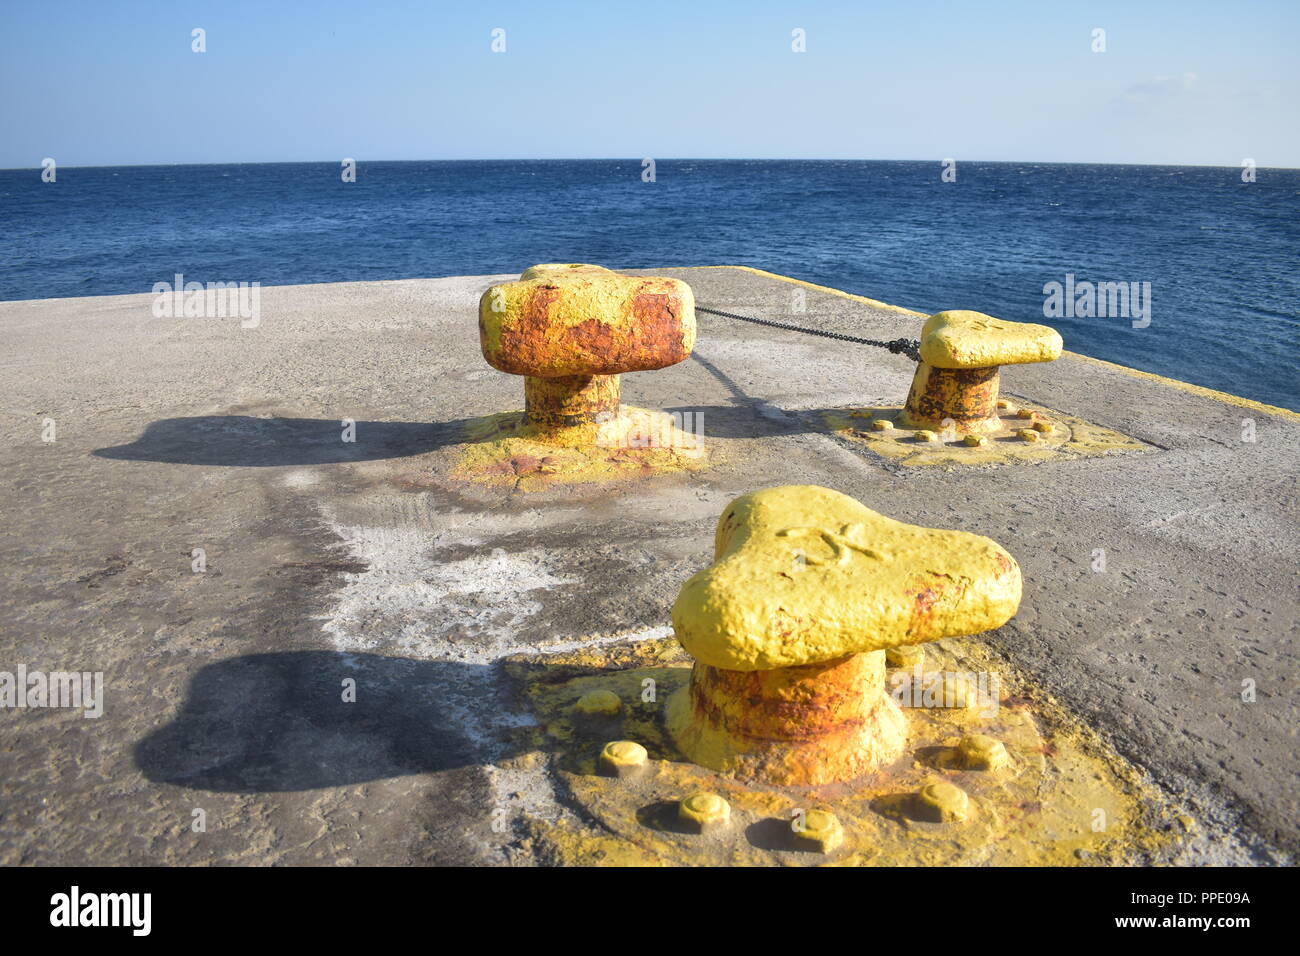 Greece, the charming, beautiful island of Sikinos.  Three yellow bollards for docking ferries, on the edge of the concrete jetty at the islands port.. Stock Photo